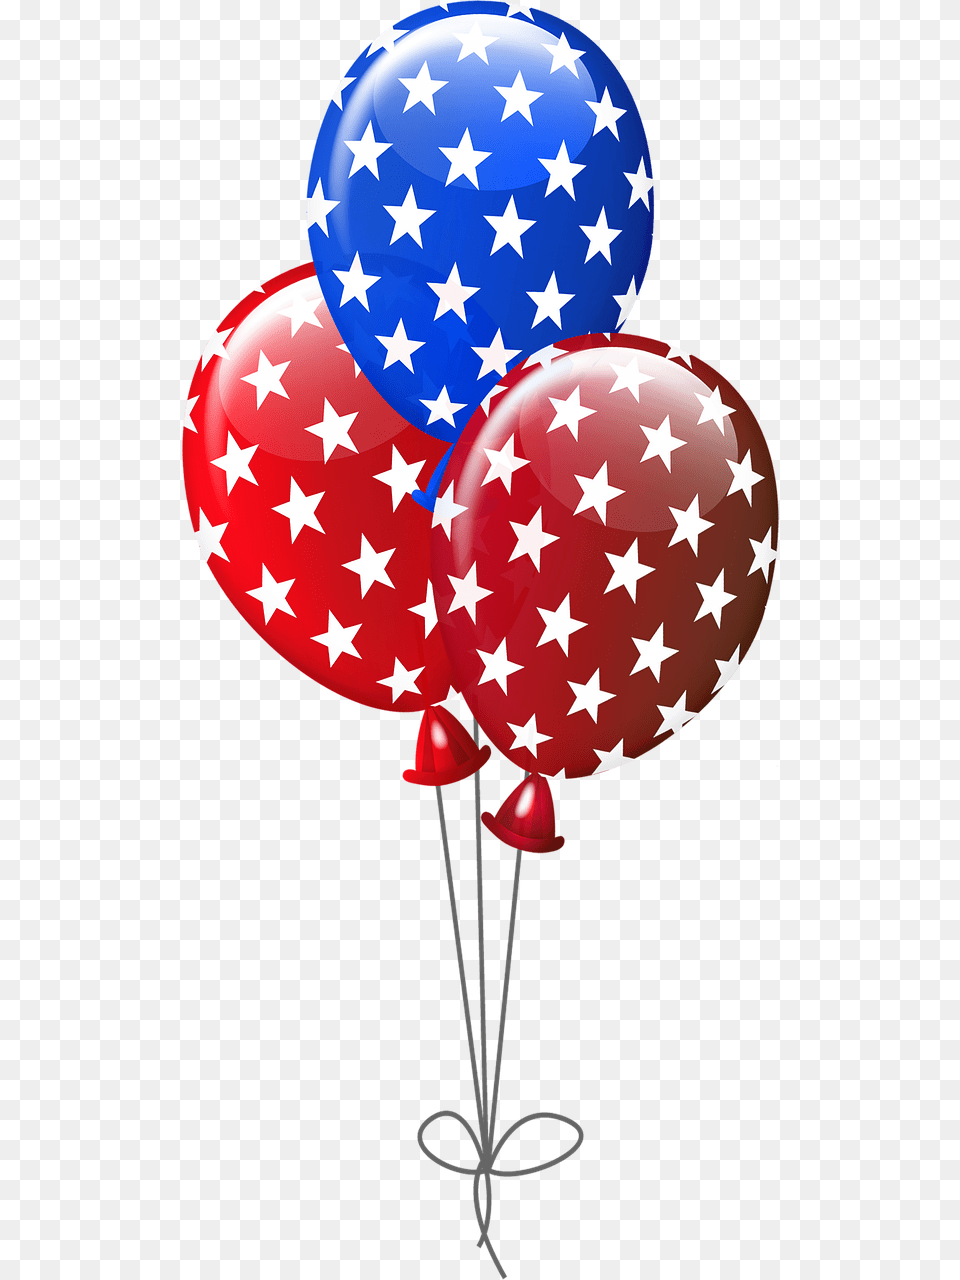 Balloons Blue Balloons Streamers Photo Red White And Blue Balloons Clipart, Balloon, Flag Free Png